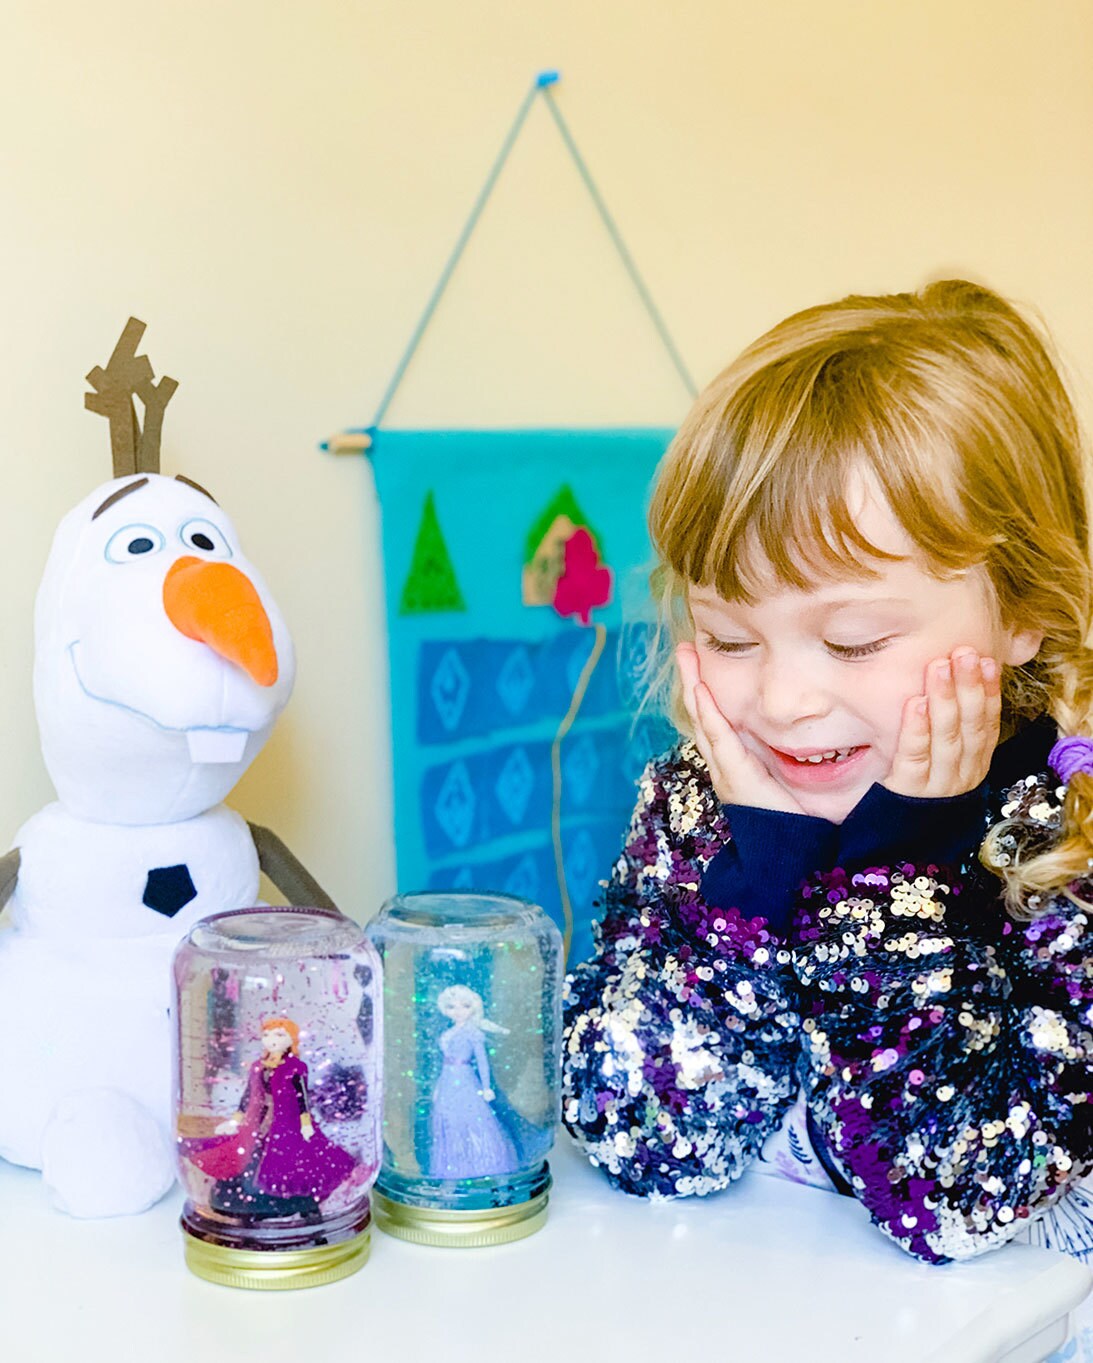 A little girl and her Olaf doll pose next to two homemade snow globes made from mason jars, featuring Anna and Elsa.